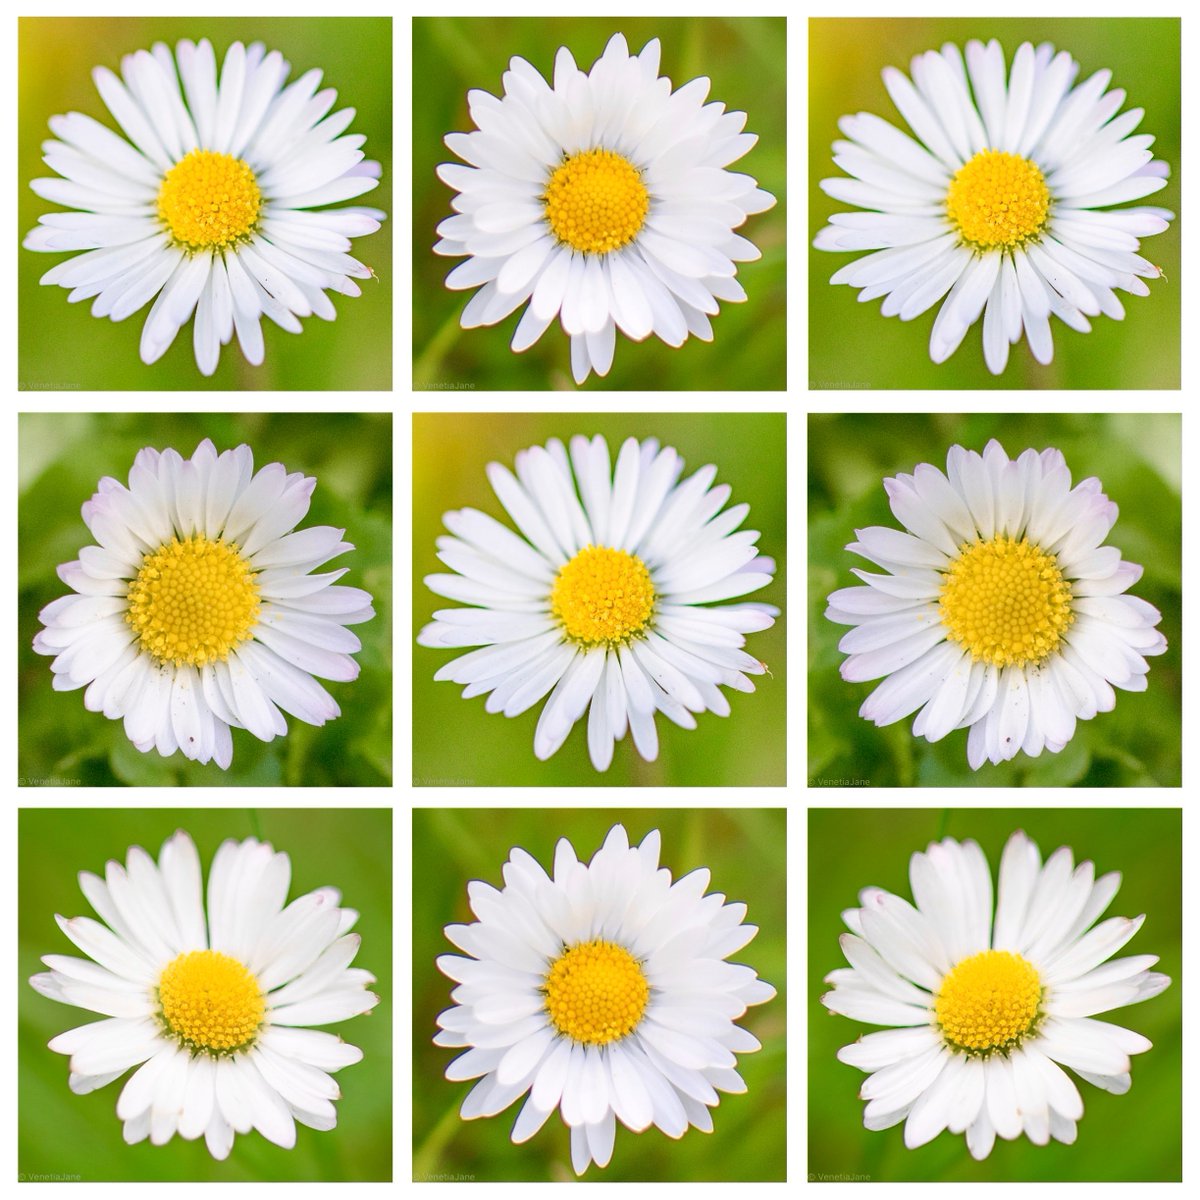 The daisy is a birth flower for those born in April. Its common name, from old English 'daeges-eage' (day's eye), references the fact it only opens its flowers during the day, and closes them at night. Its Latin name, 'Bellis perennis', means 'always beautiful'. #nature #folklore